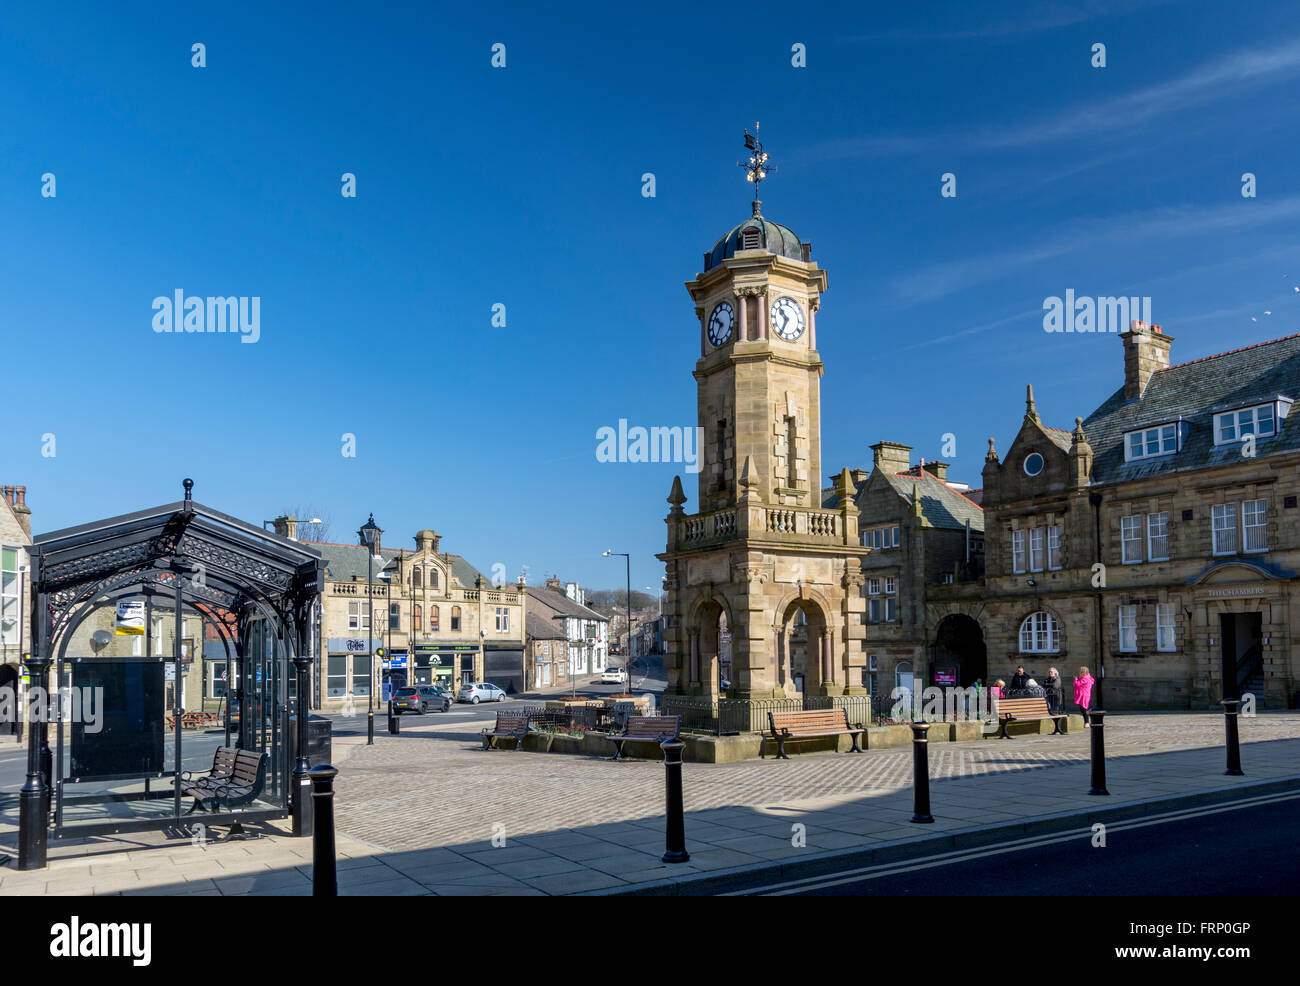 The Towngate, Town square, with the town clock in the Lancashire market town of Great Harwood, Lancs, UK Stock Photo